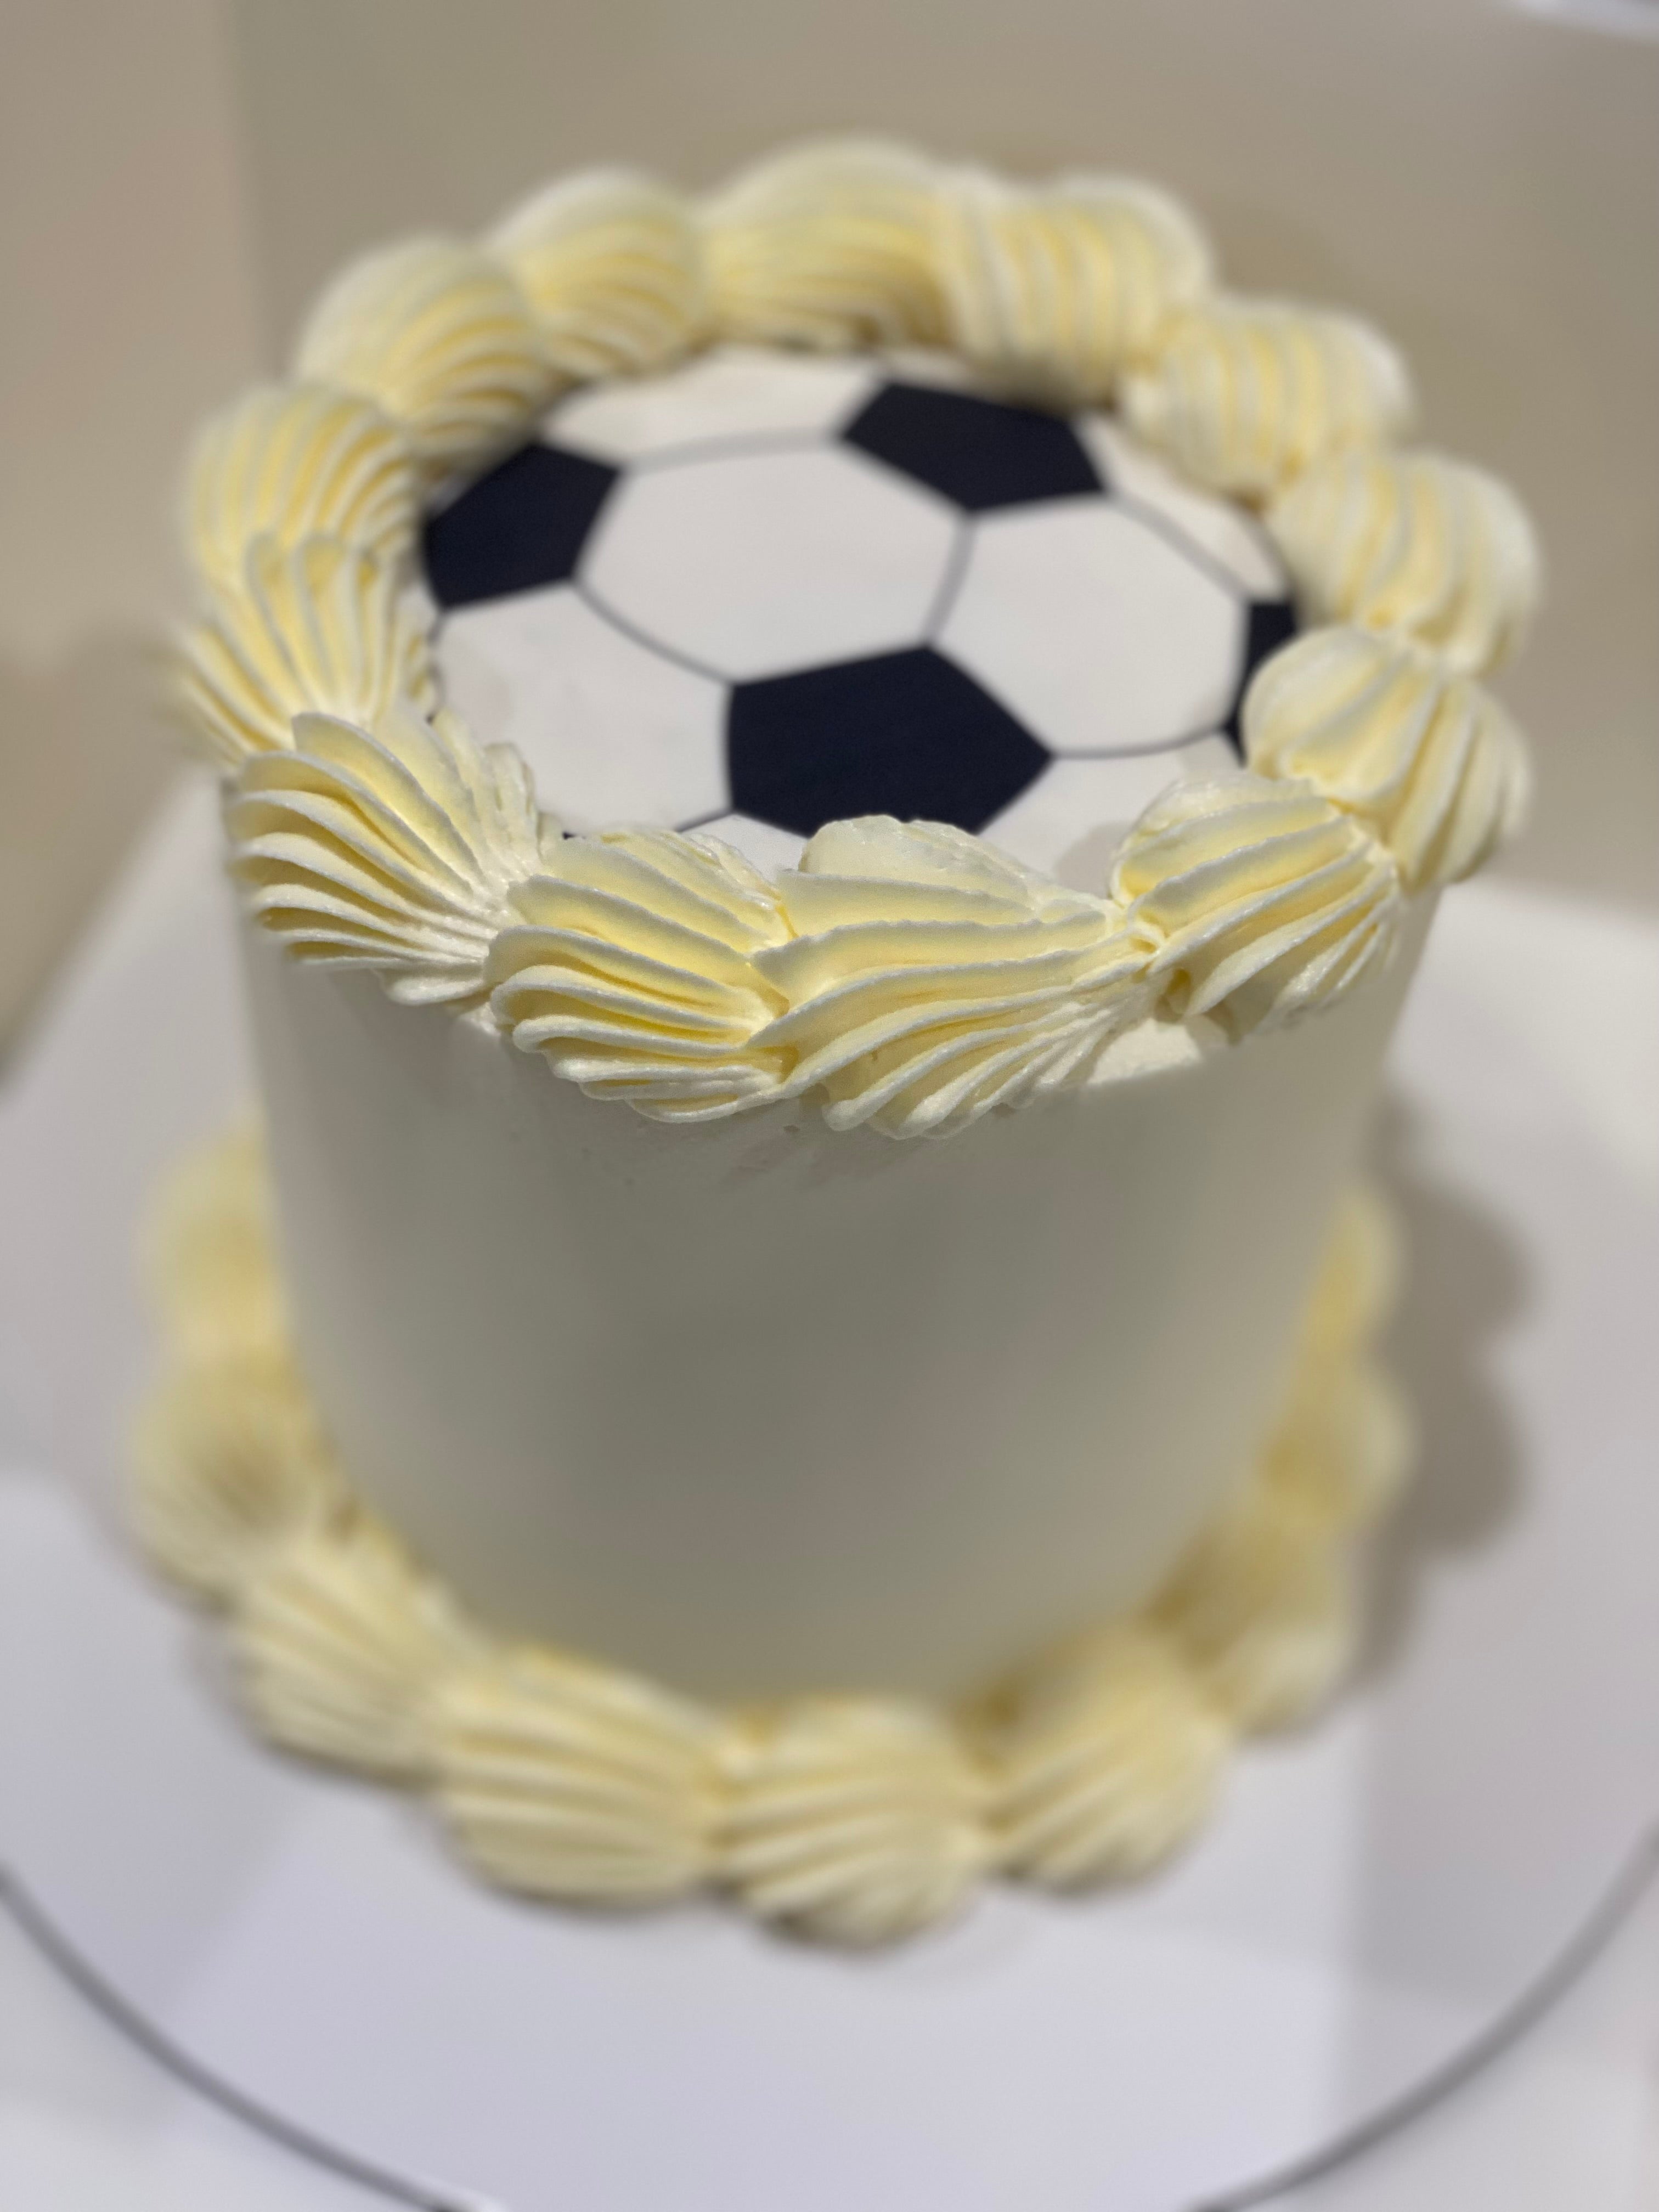 Soccer  Printed image Cakes